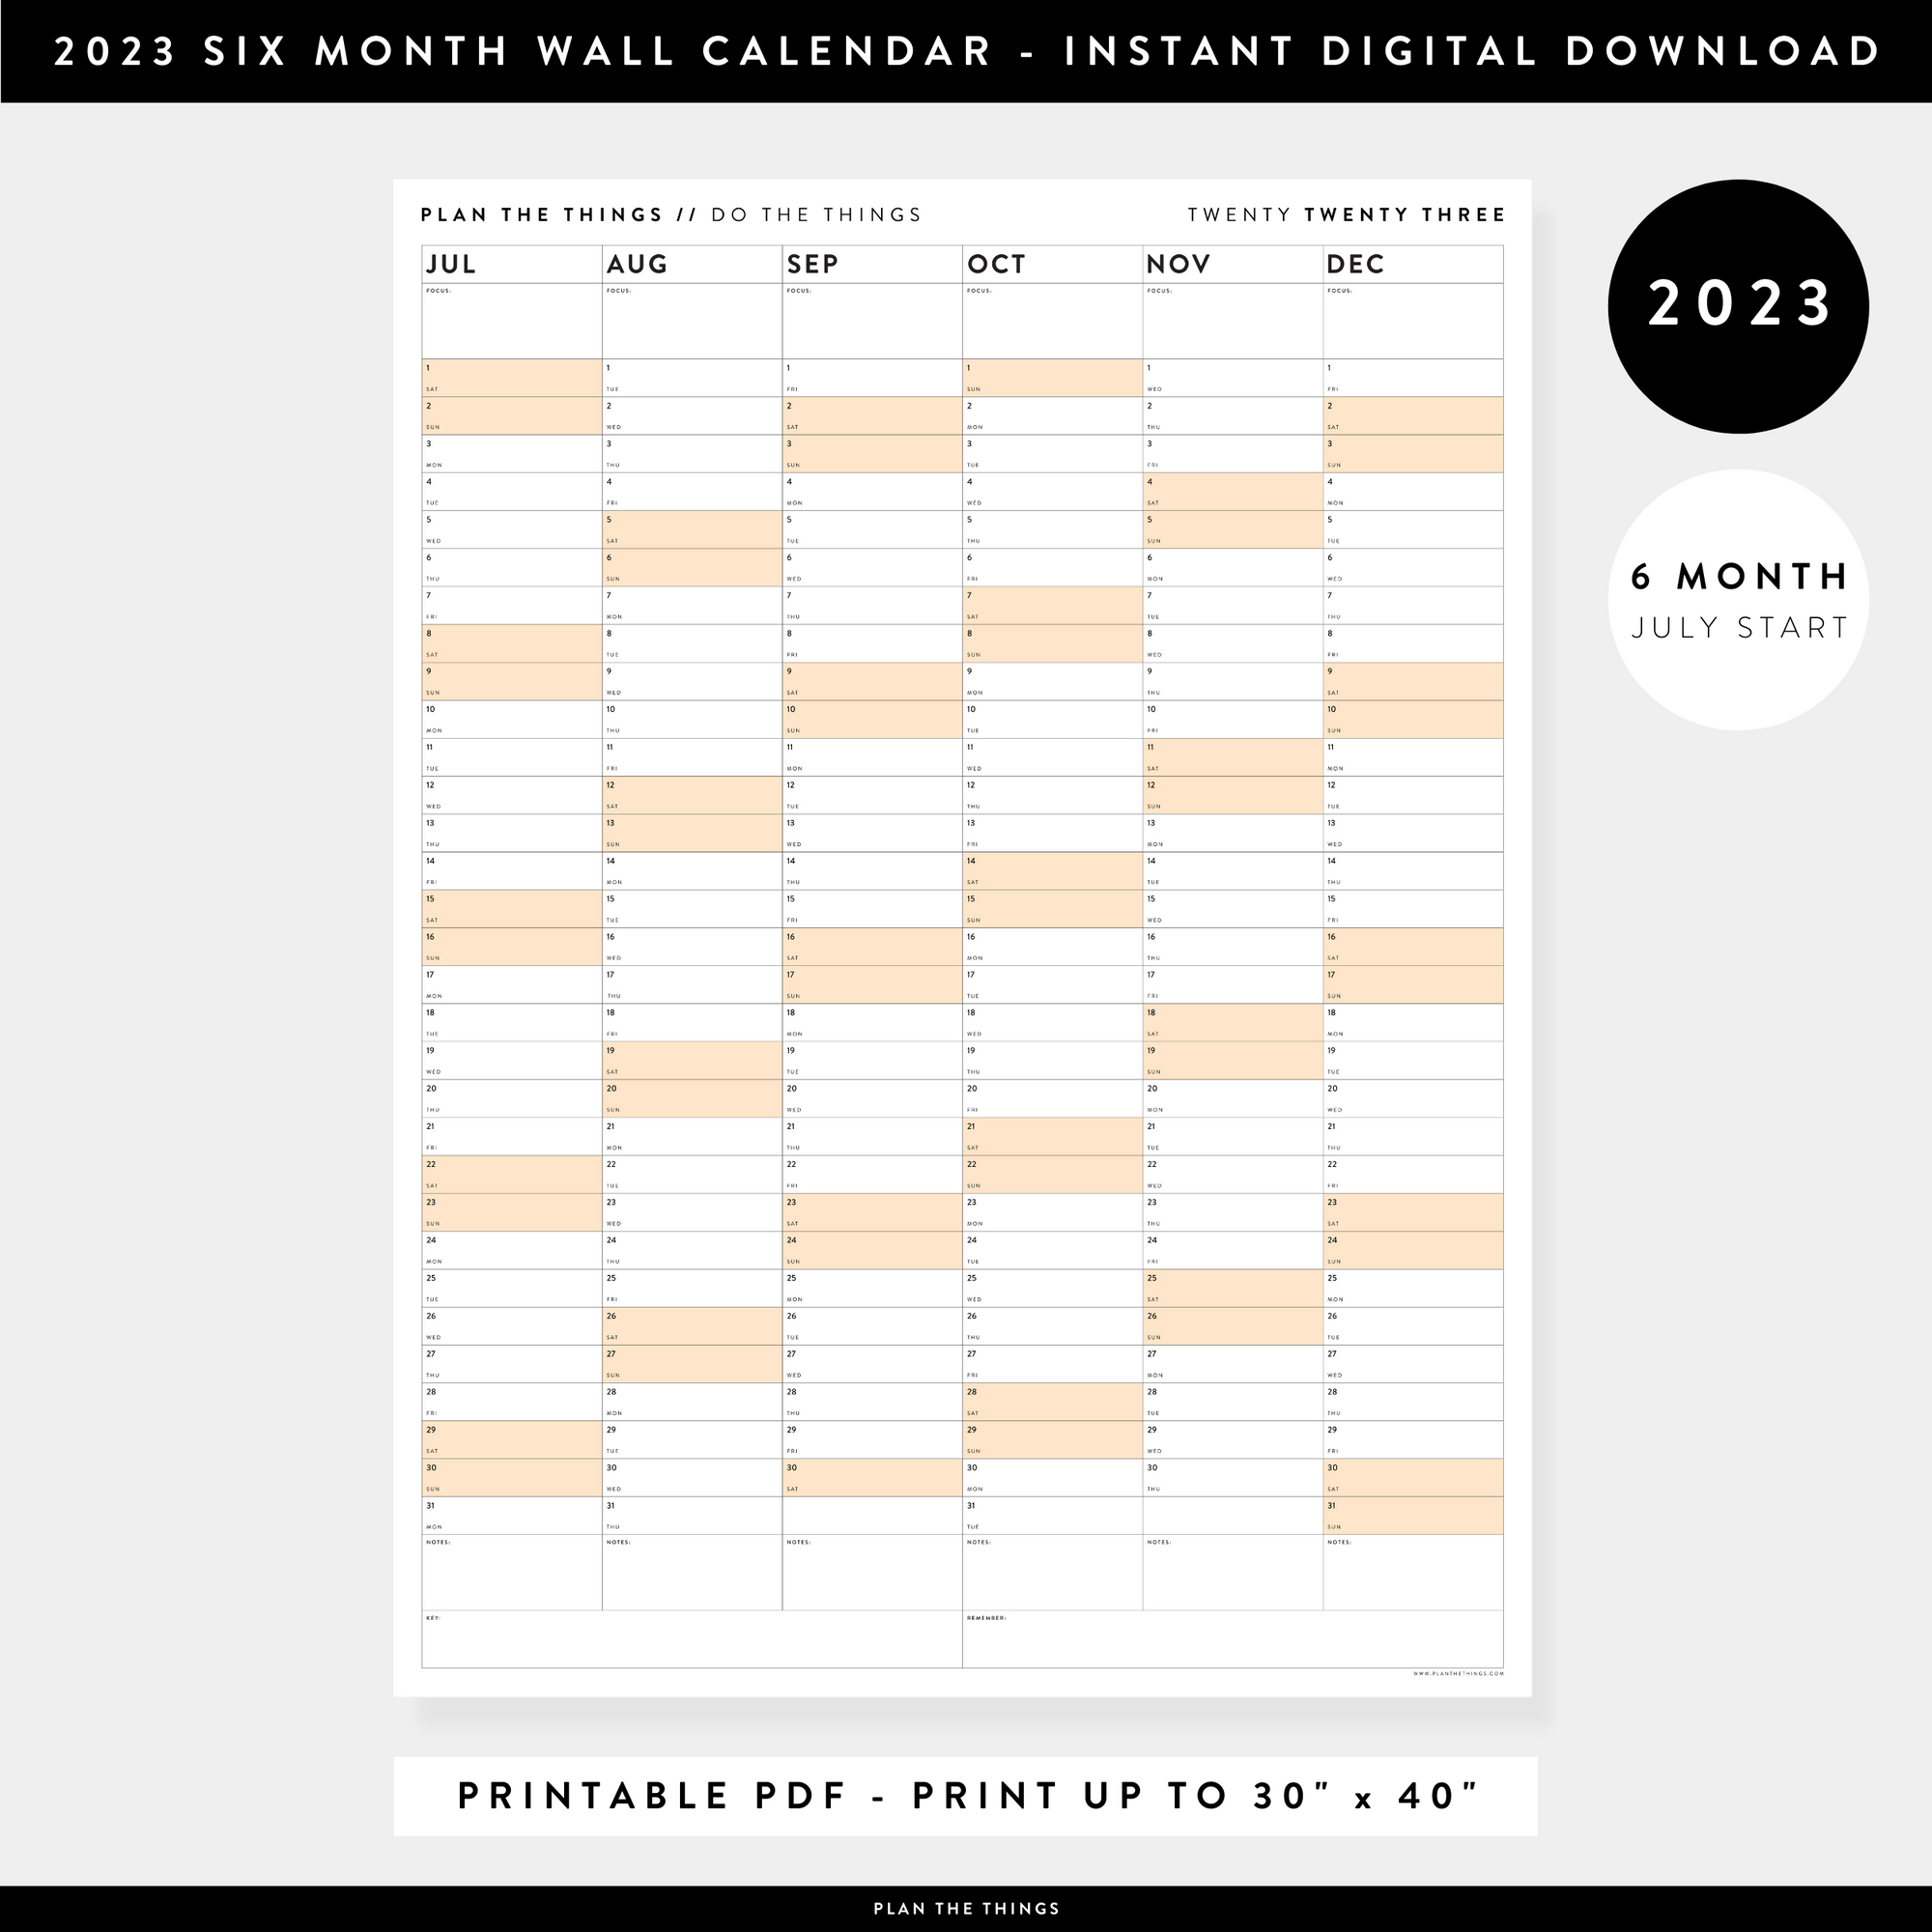 PRINTABLE SIX MONTH 2023 WALL CALENDAR (JULY TO DECEMBER) WITH ORANGE WEEKENDS - INSTANT DOWNLOAD